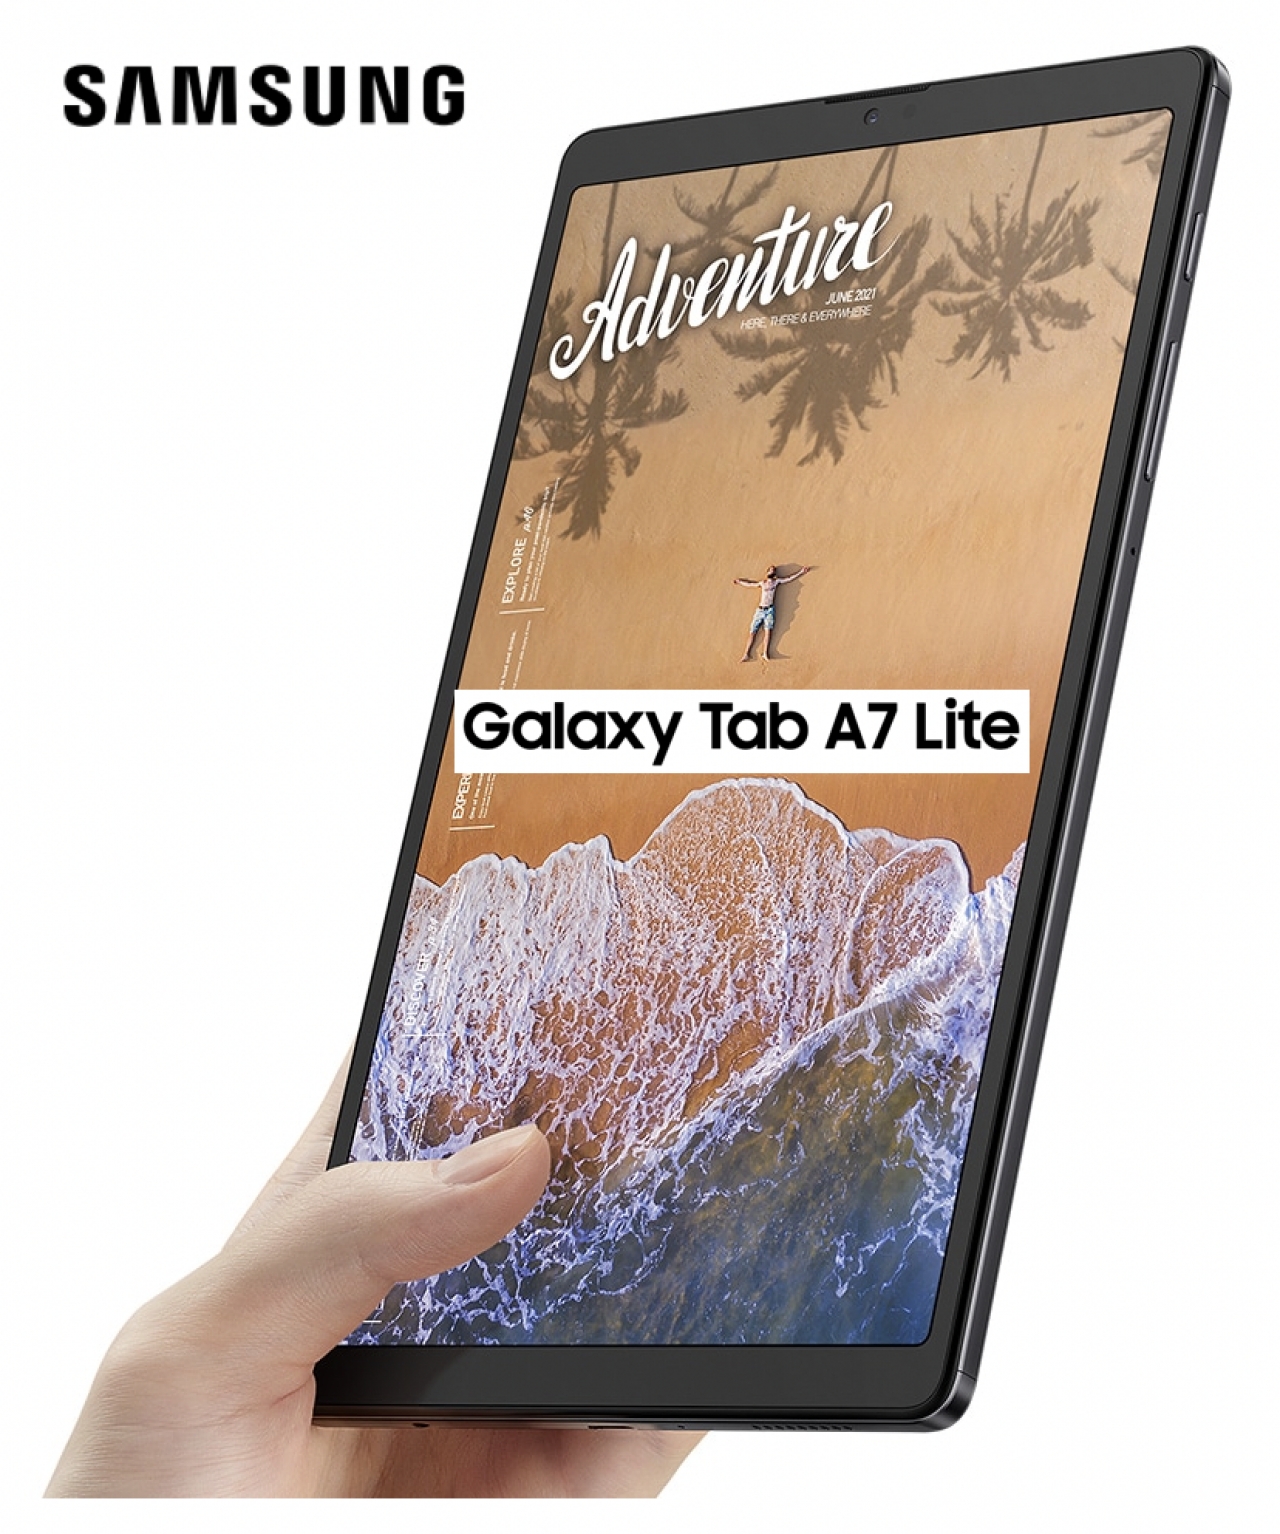 Samsung's Galaxy Tab A9 Plus is an underrated entry-level tablet